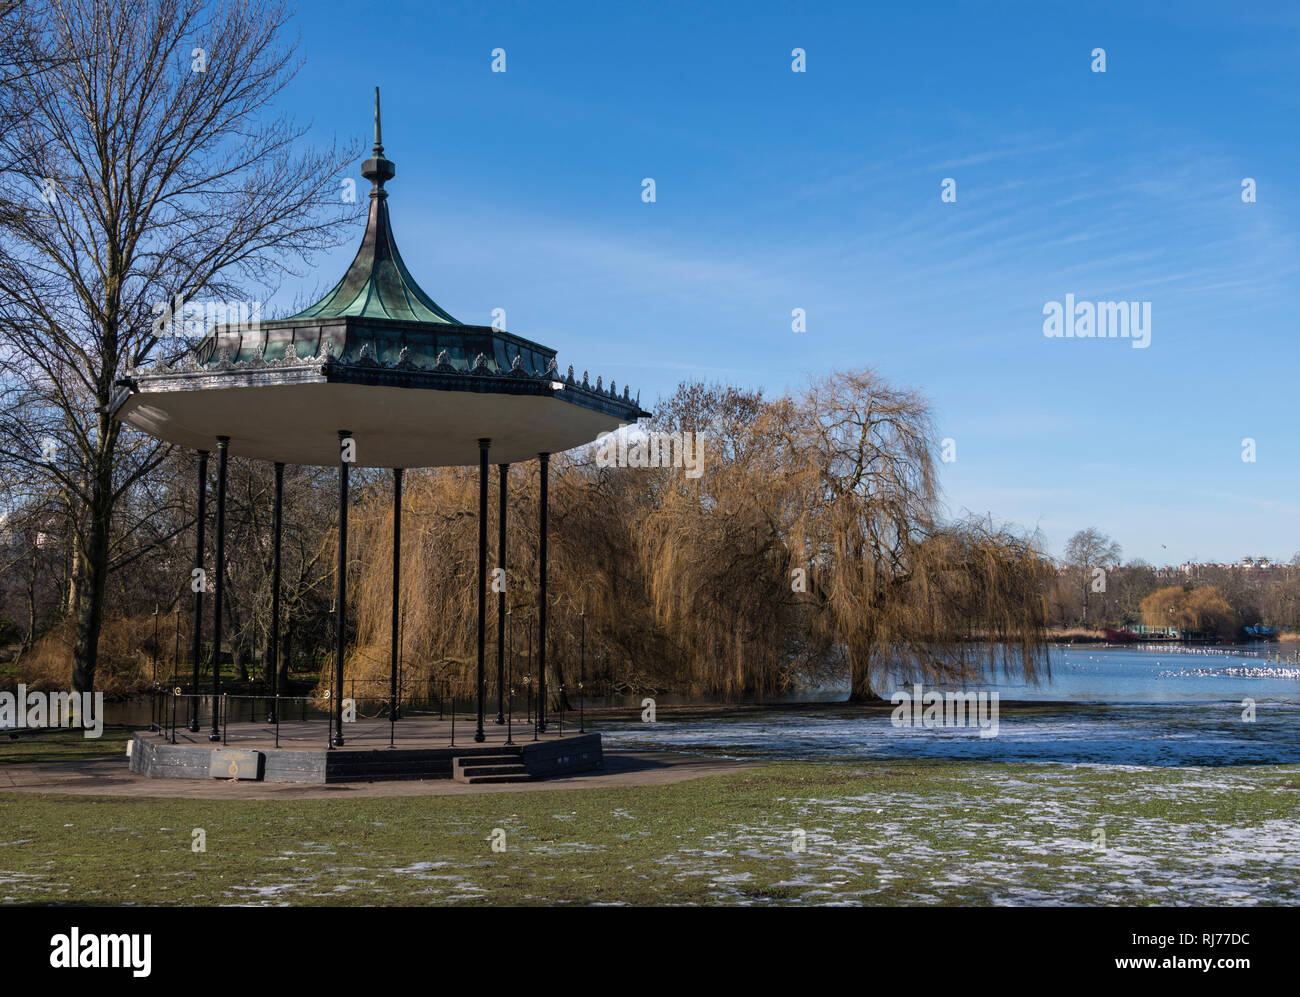 Bandstand by the lake in Regents Park, London UK Stock Photo